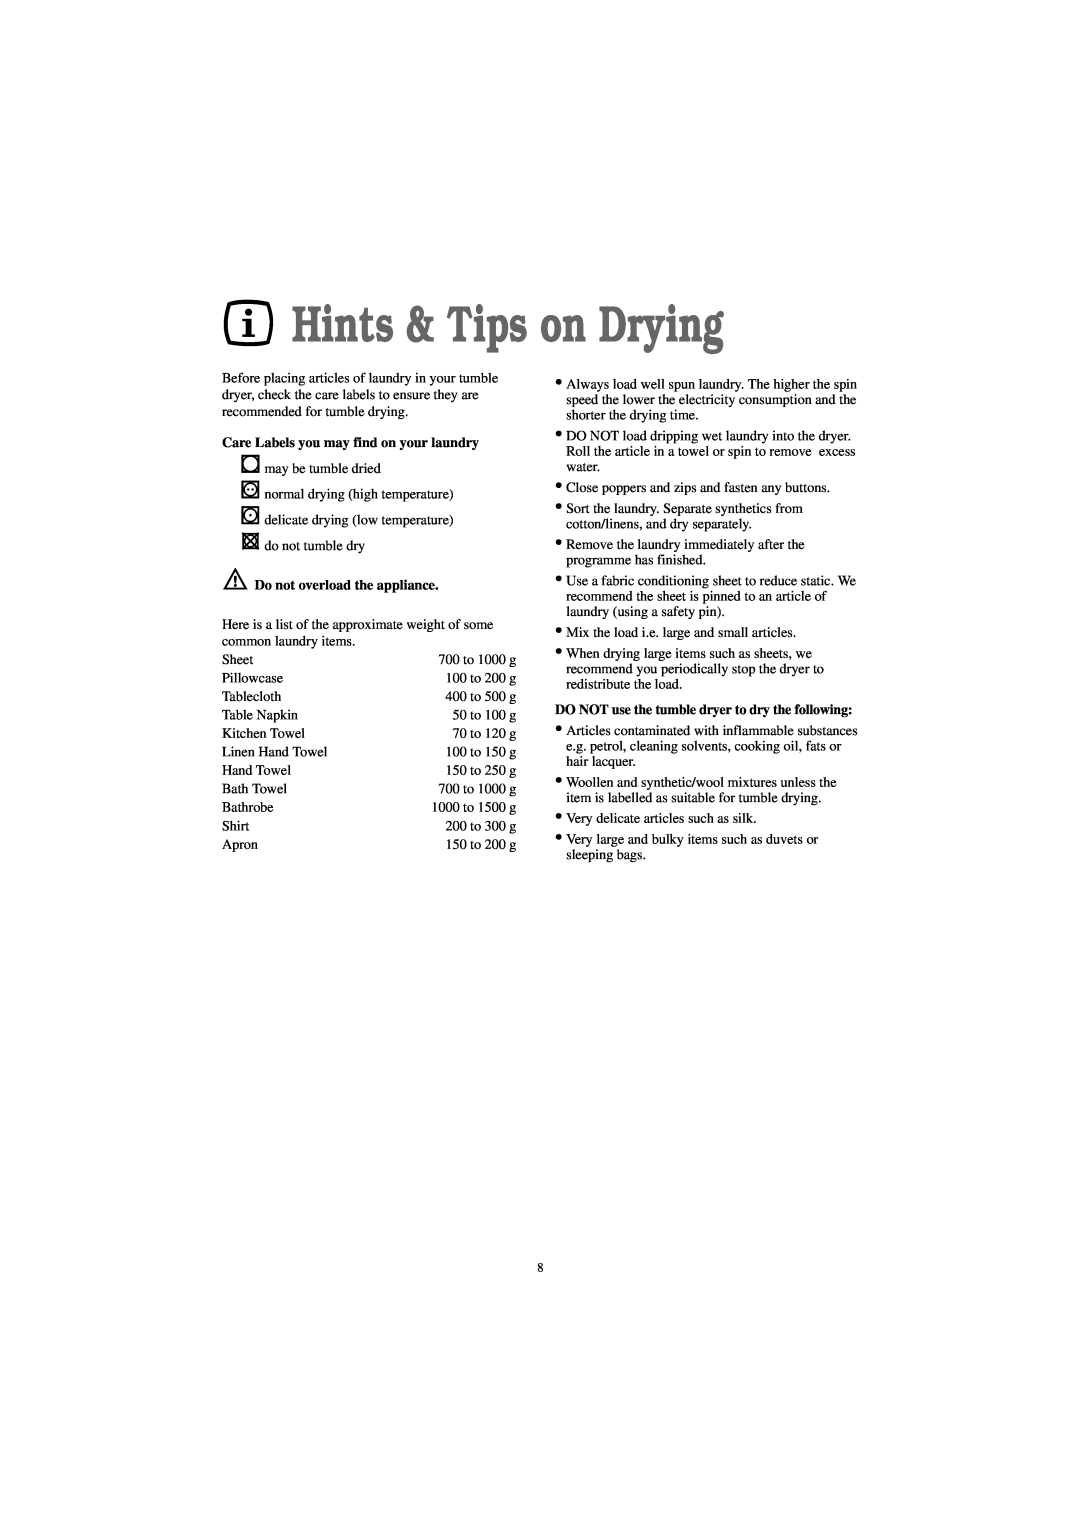 Zanussi TC 7114 S manual Hints & Tips on Drying, Care Labels you may find on your laundry, Do not overload the appliance 